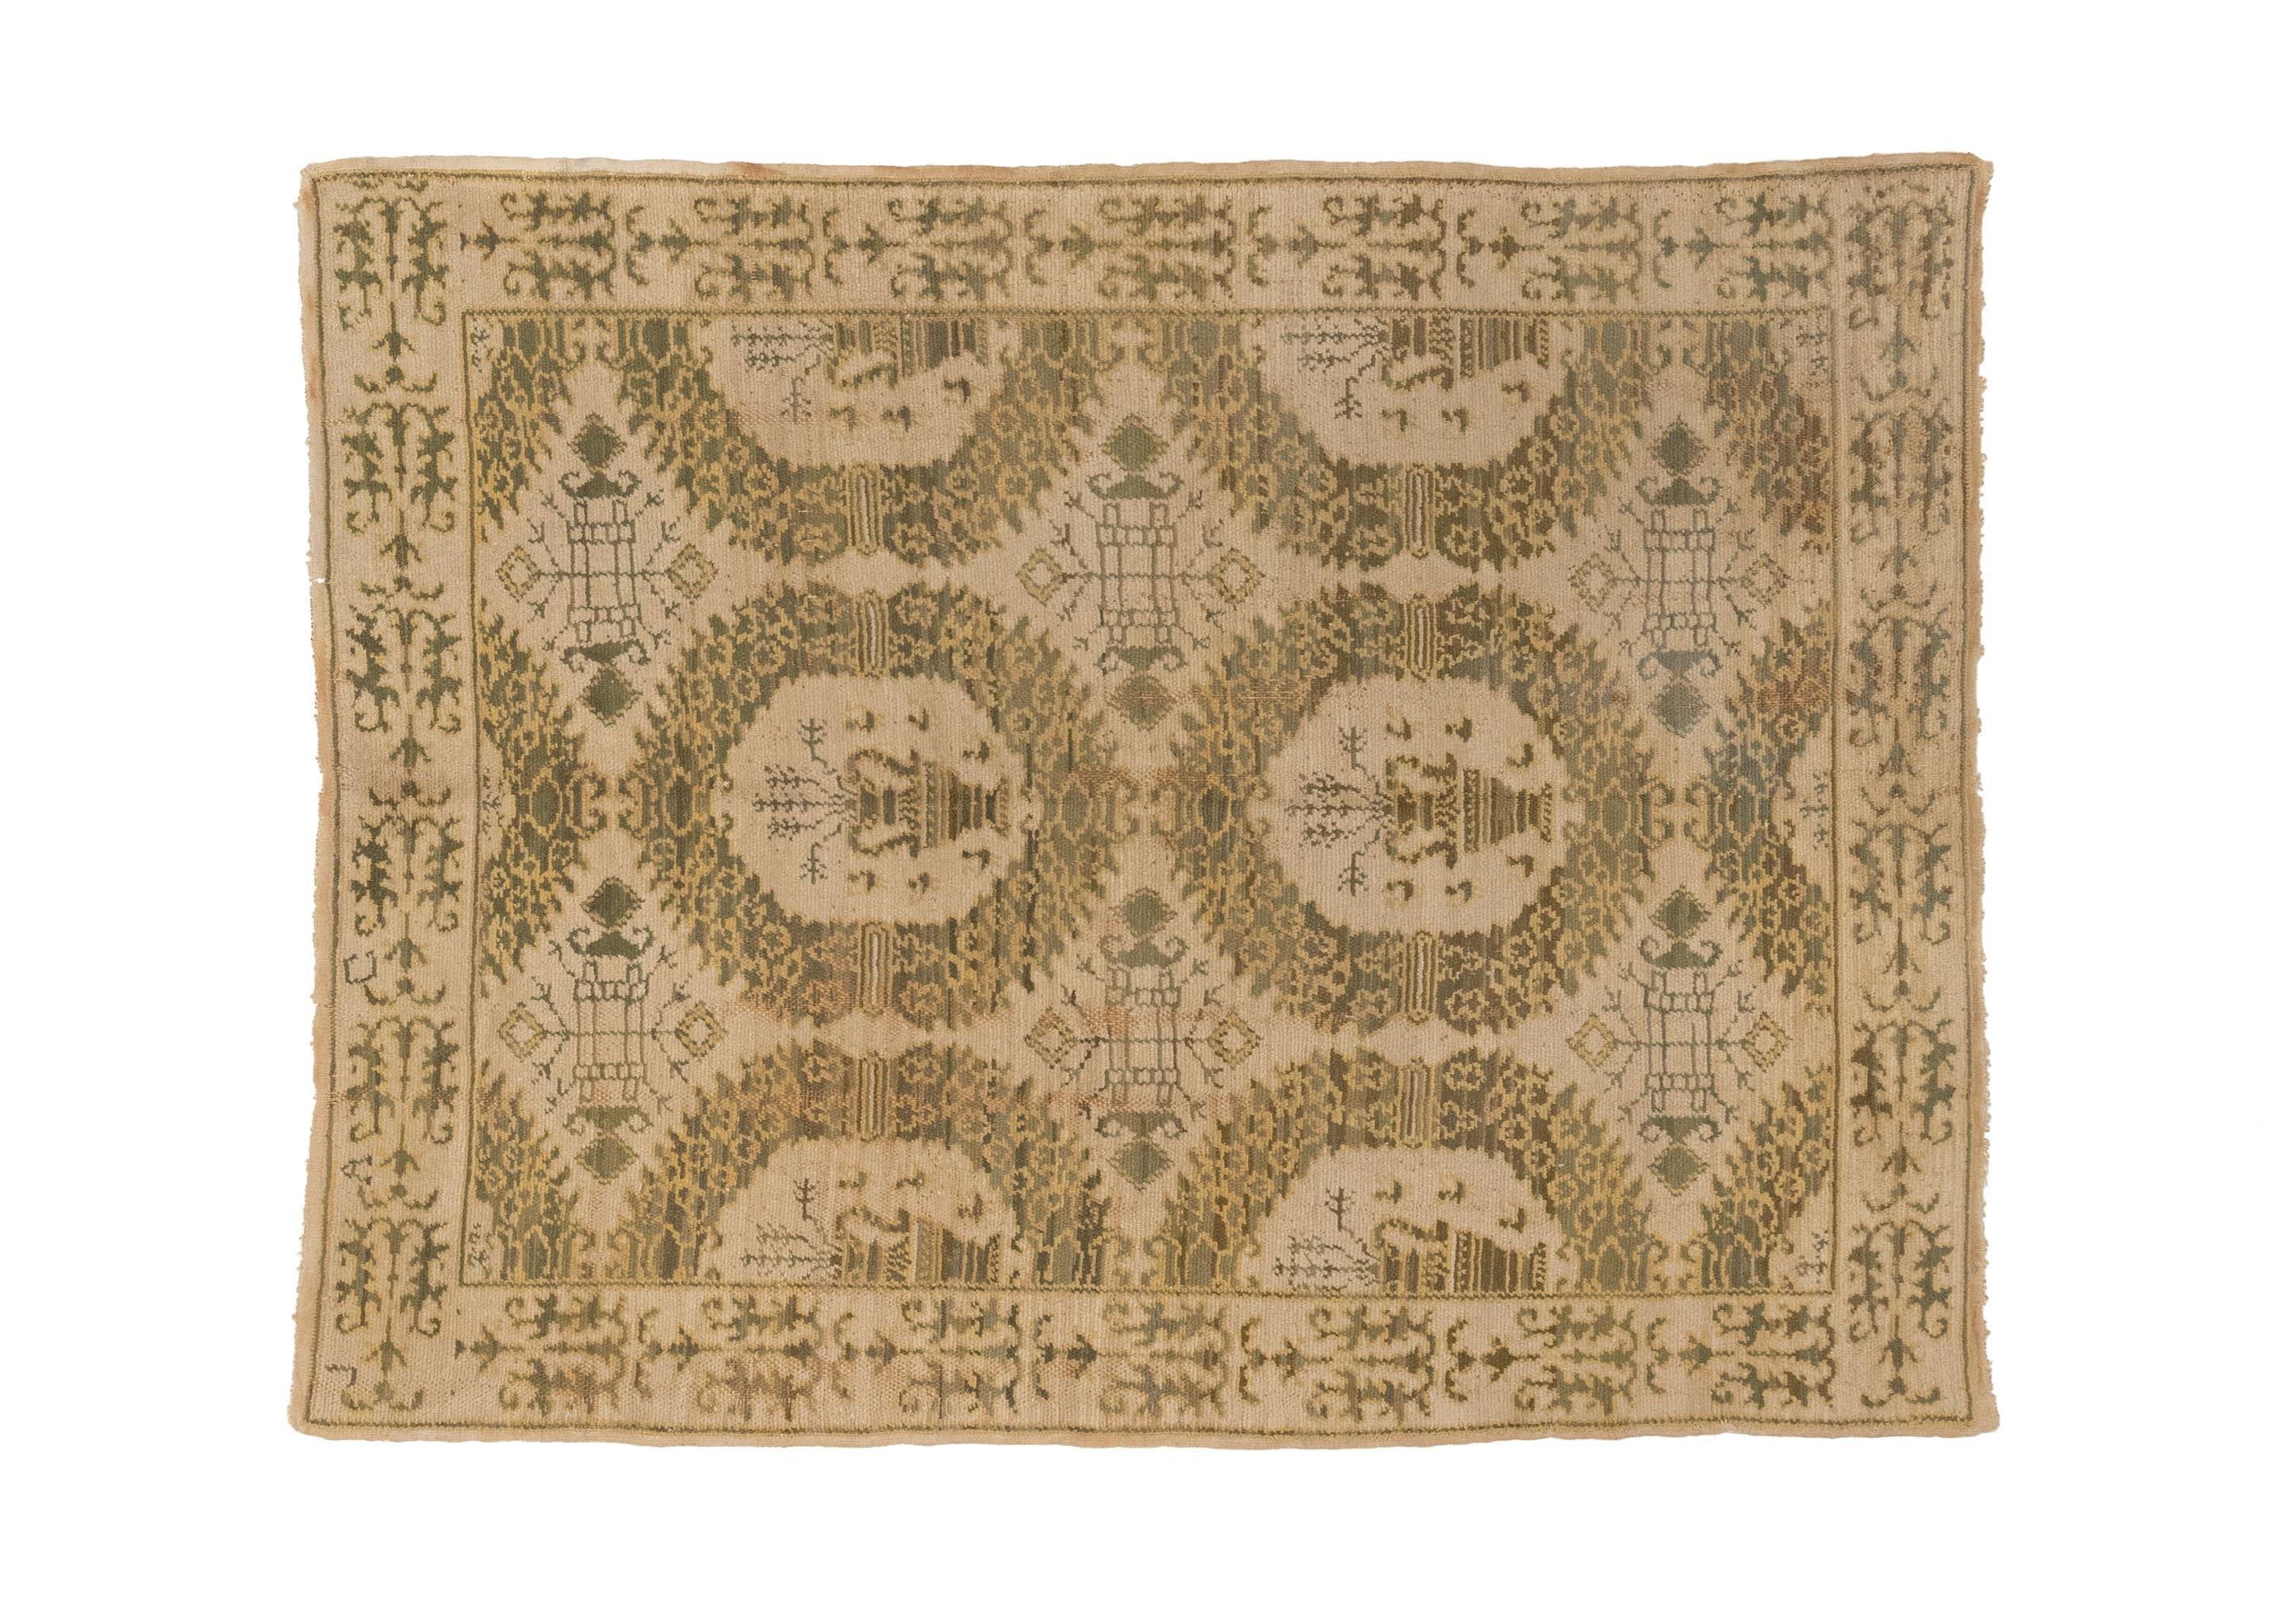 A unique and exquisite piece that combines elements of contemporary design with the charm of antique Portuguese craftsmanship. The rug features a captivating color palette dominated by shades of green and beige, which create a soothing and